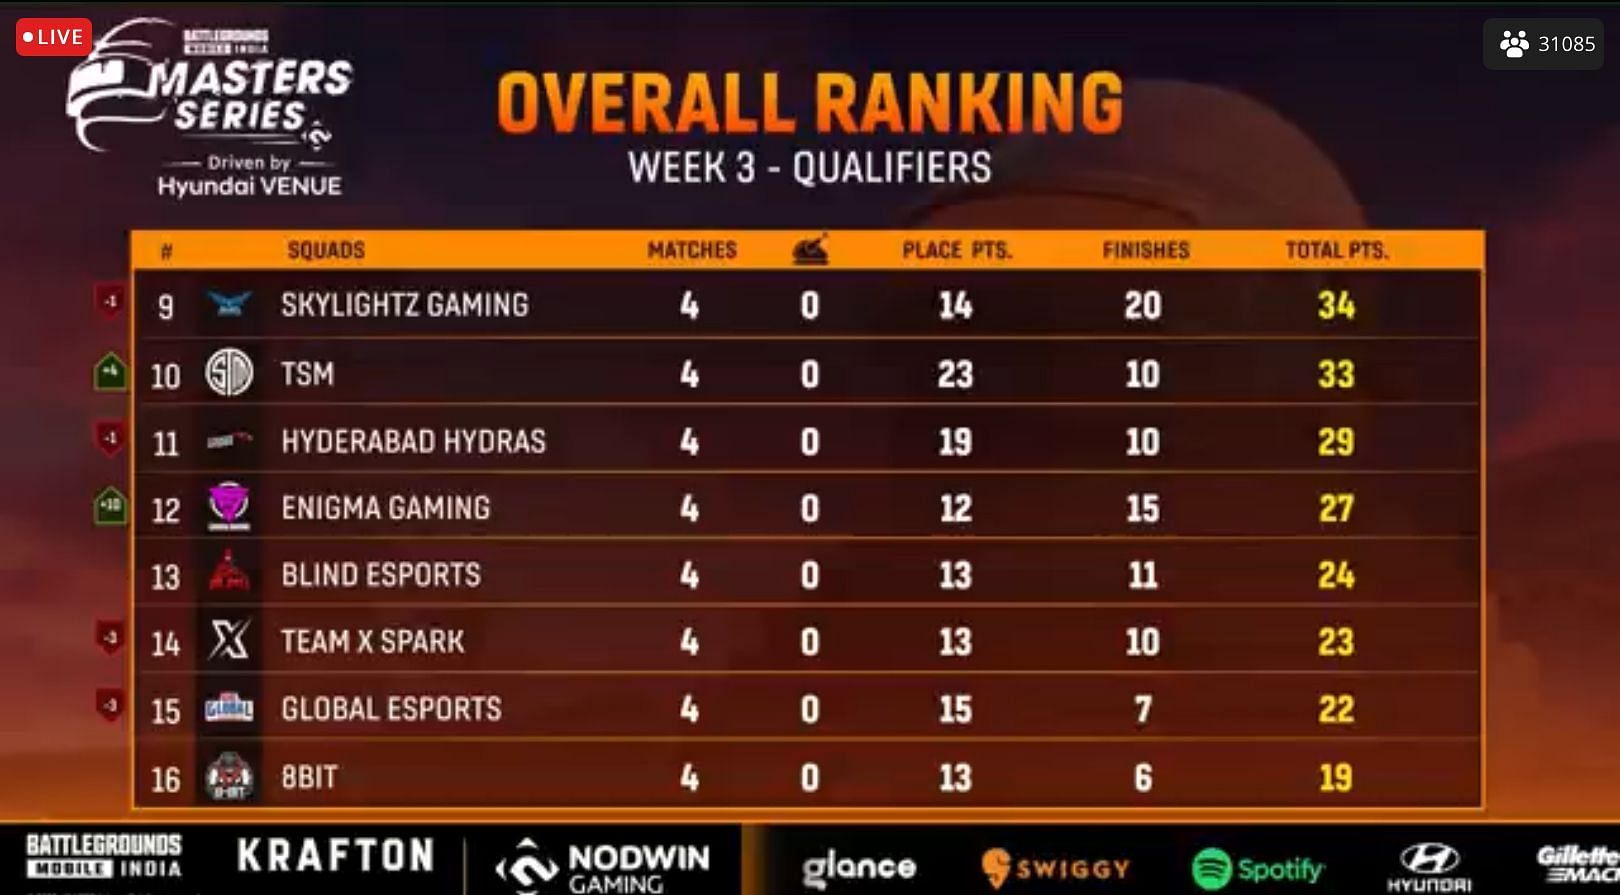 TSM placed 10th after day 2 (Image via Loco)